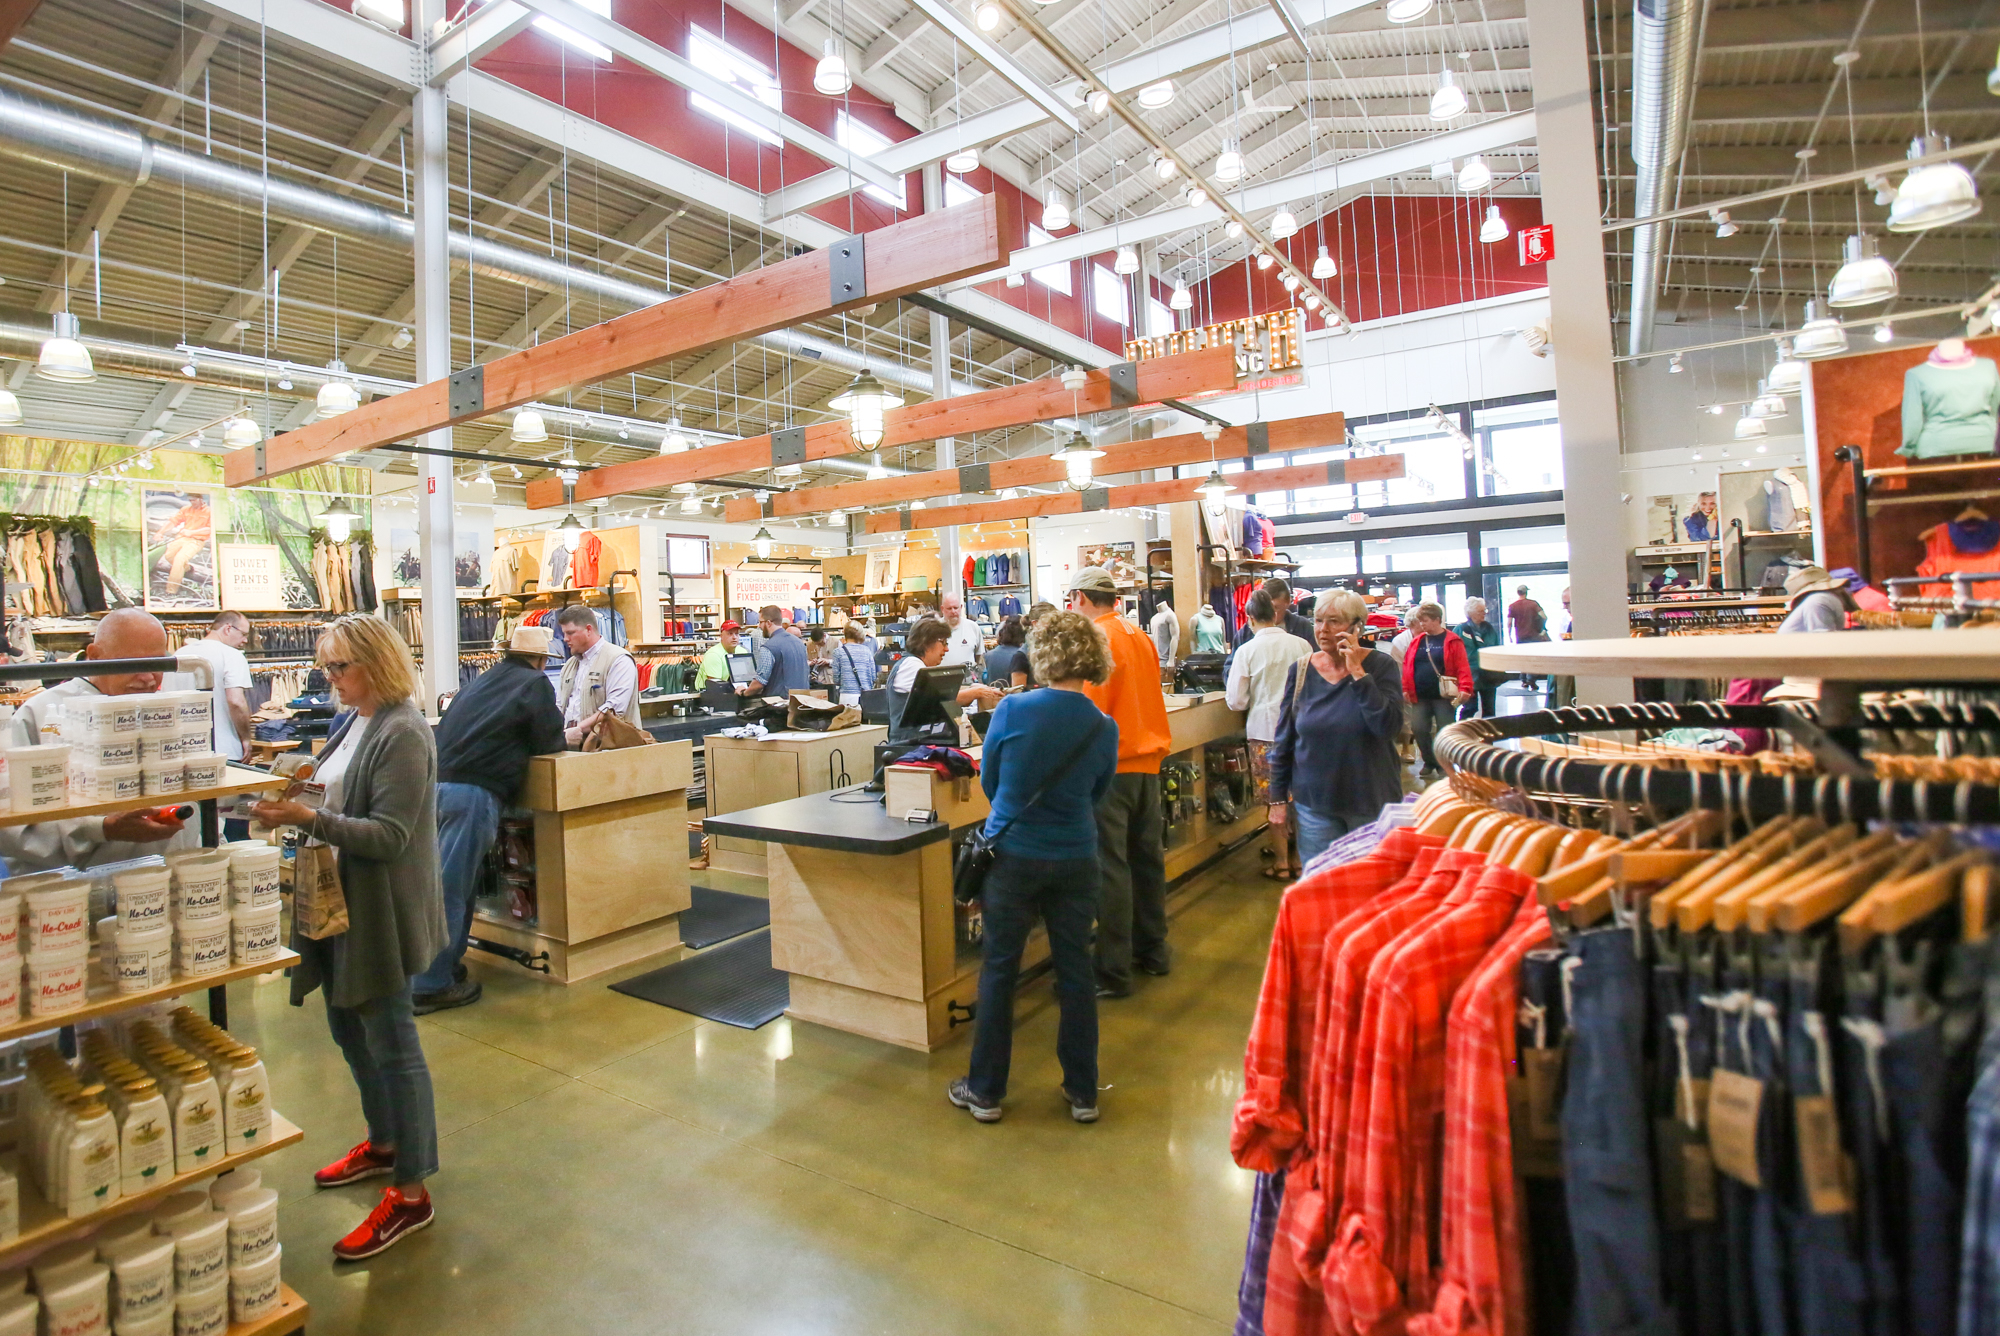 Duluth Trading Company eyeing expansion